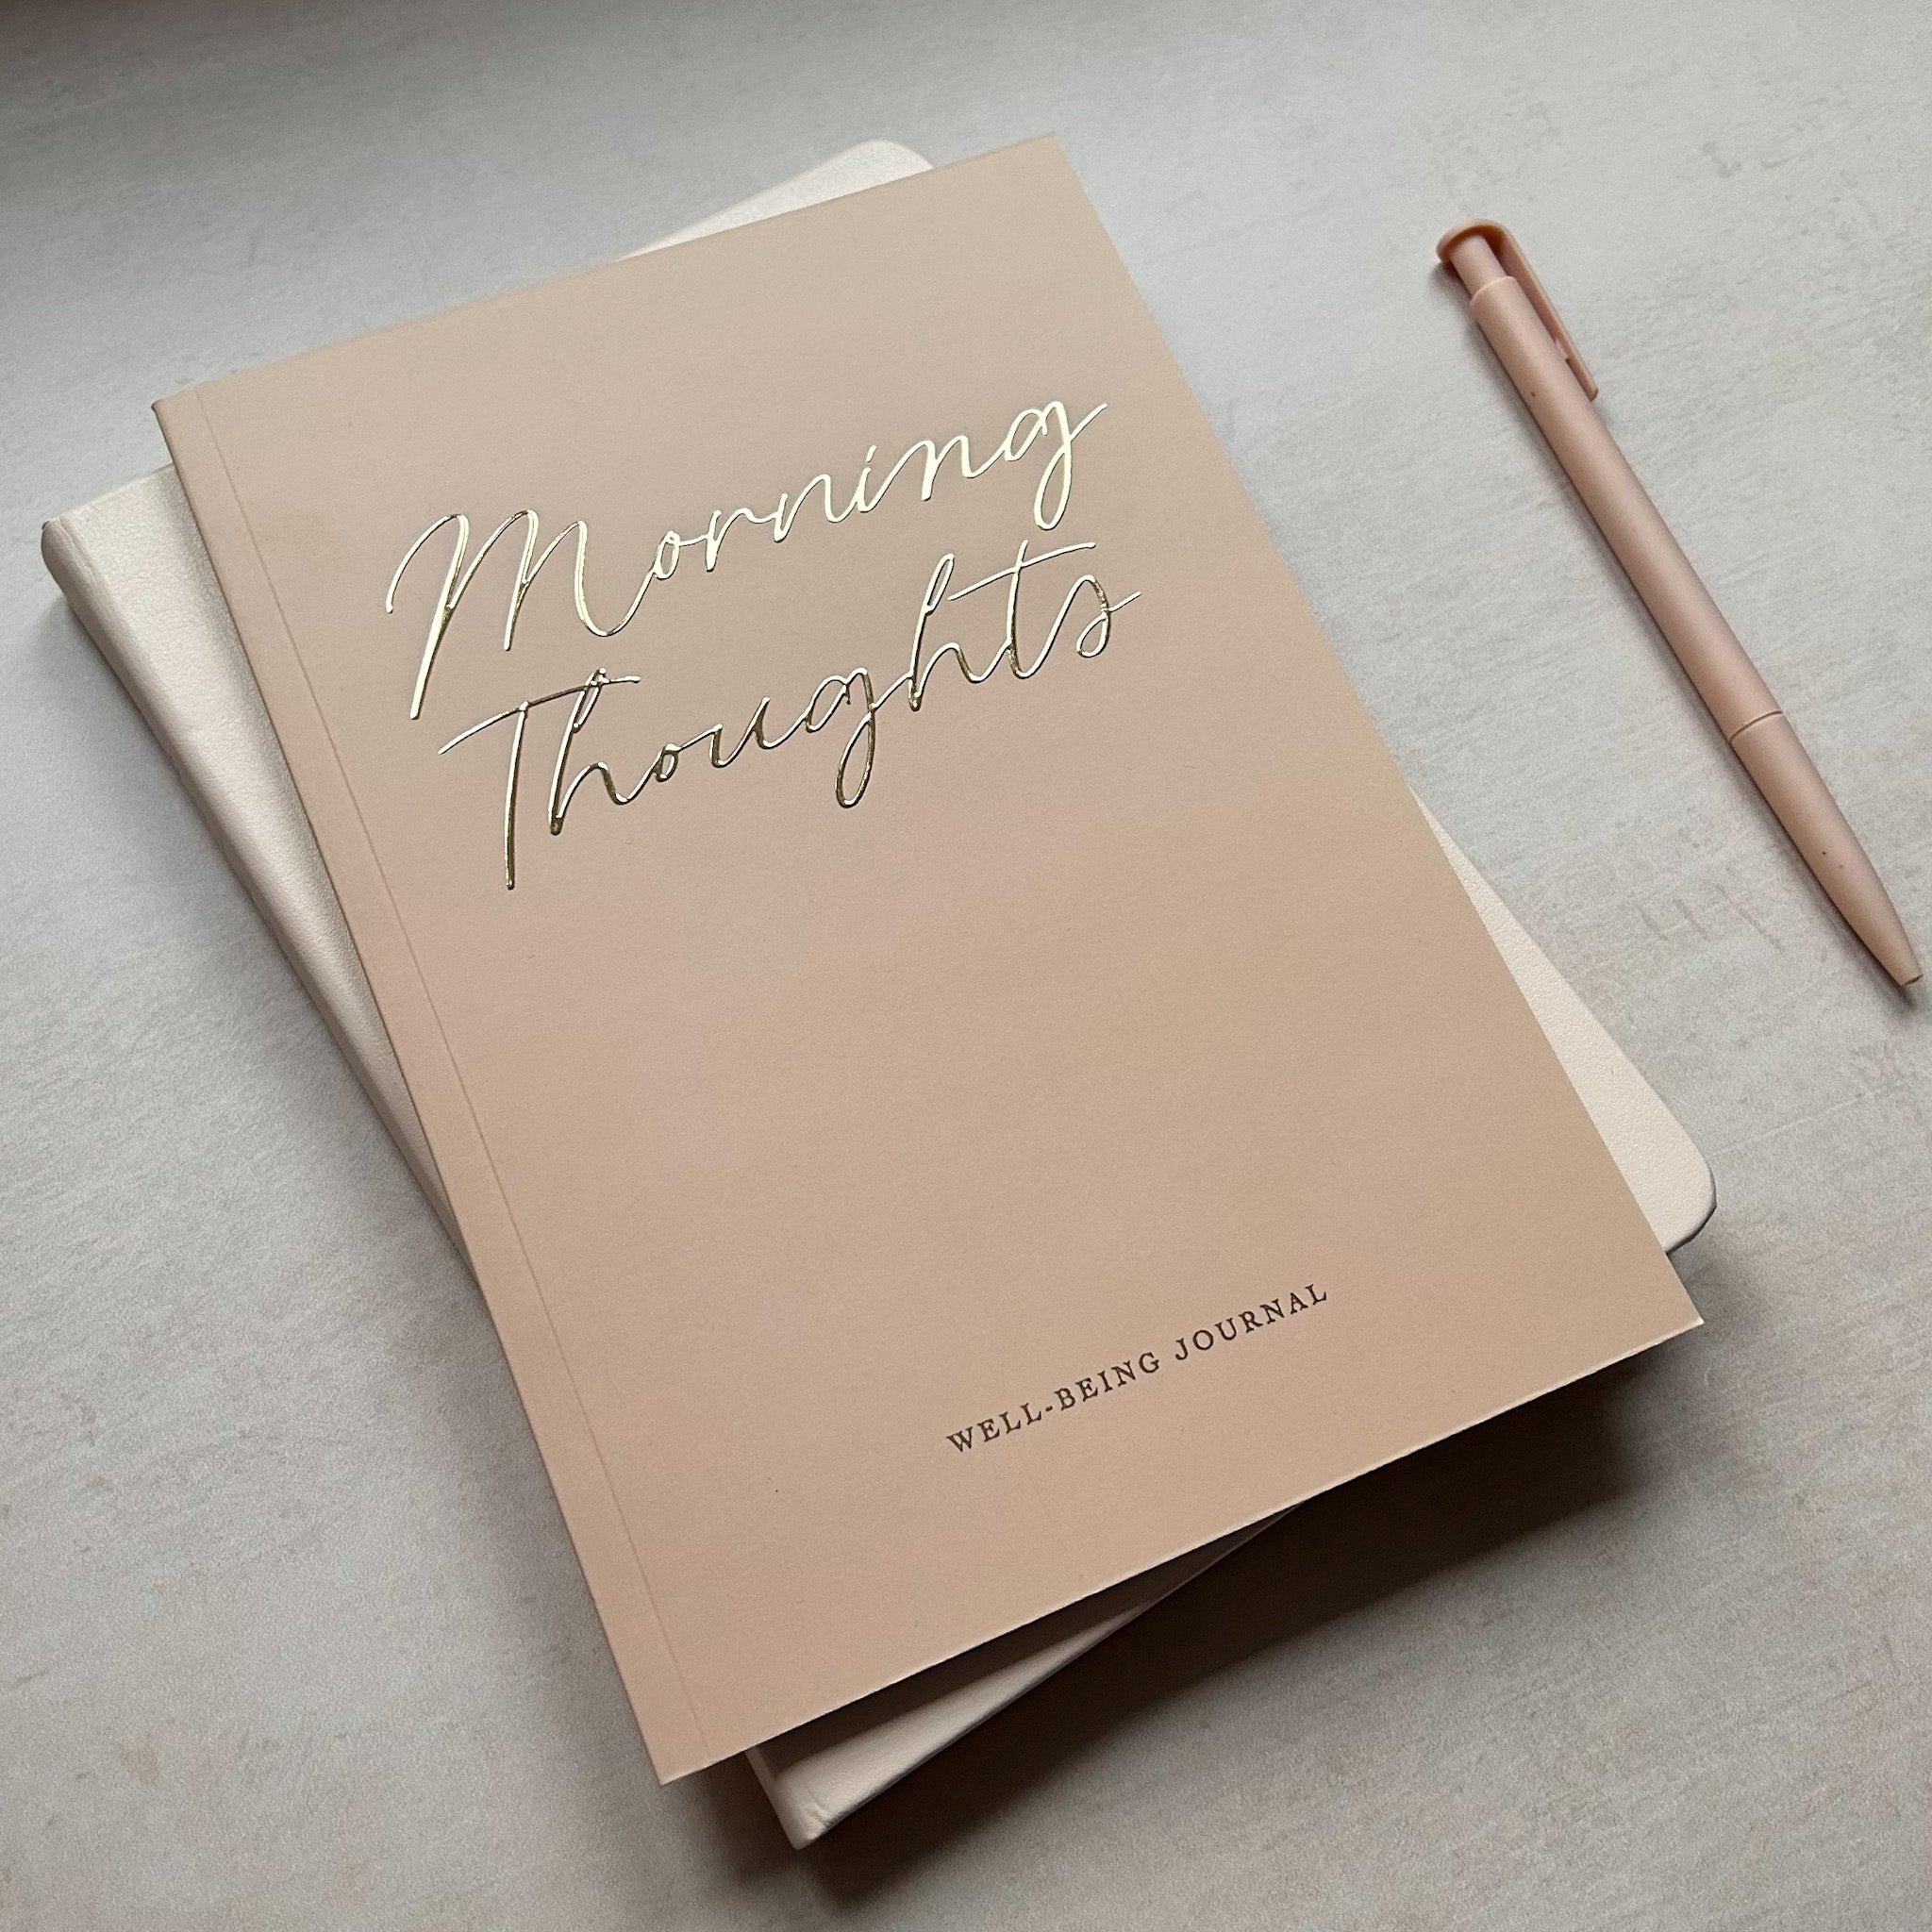 Morning Thoughts Well-Being Journal